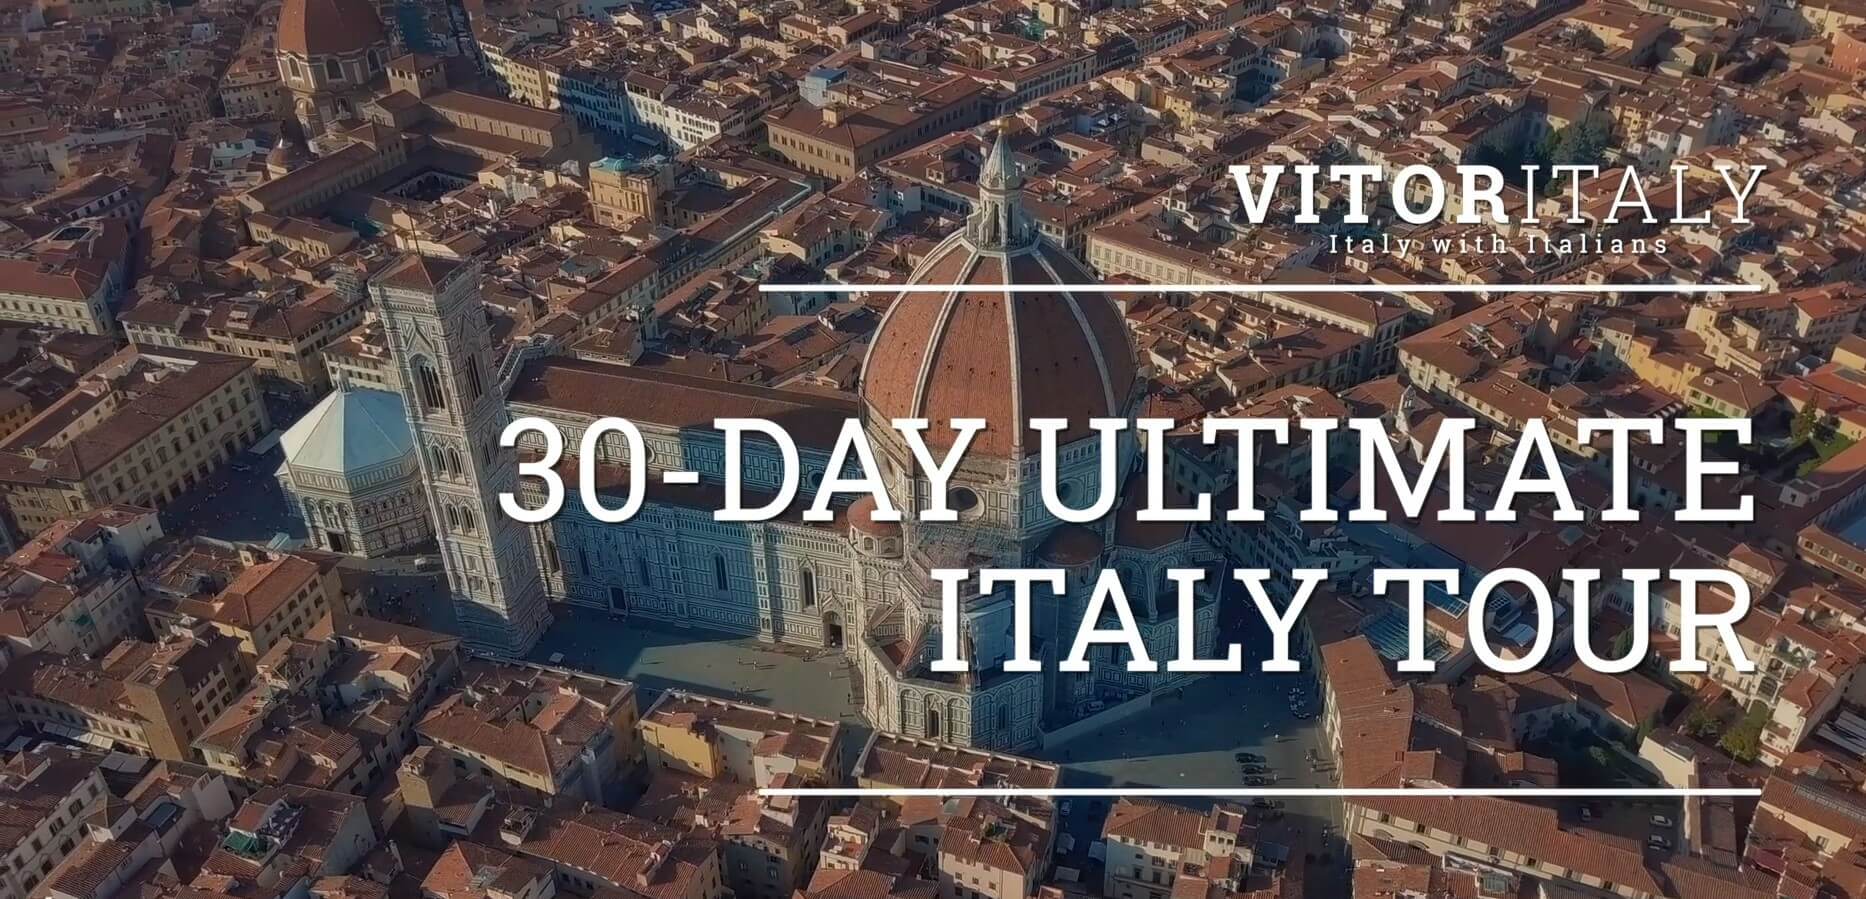 30-DAY ULTIMATE ITALY TOUR